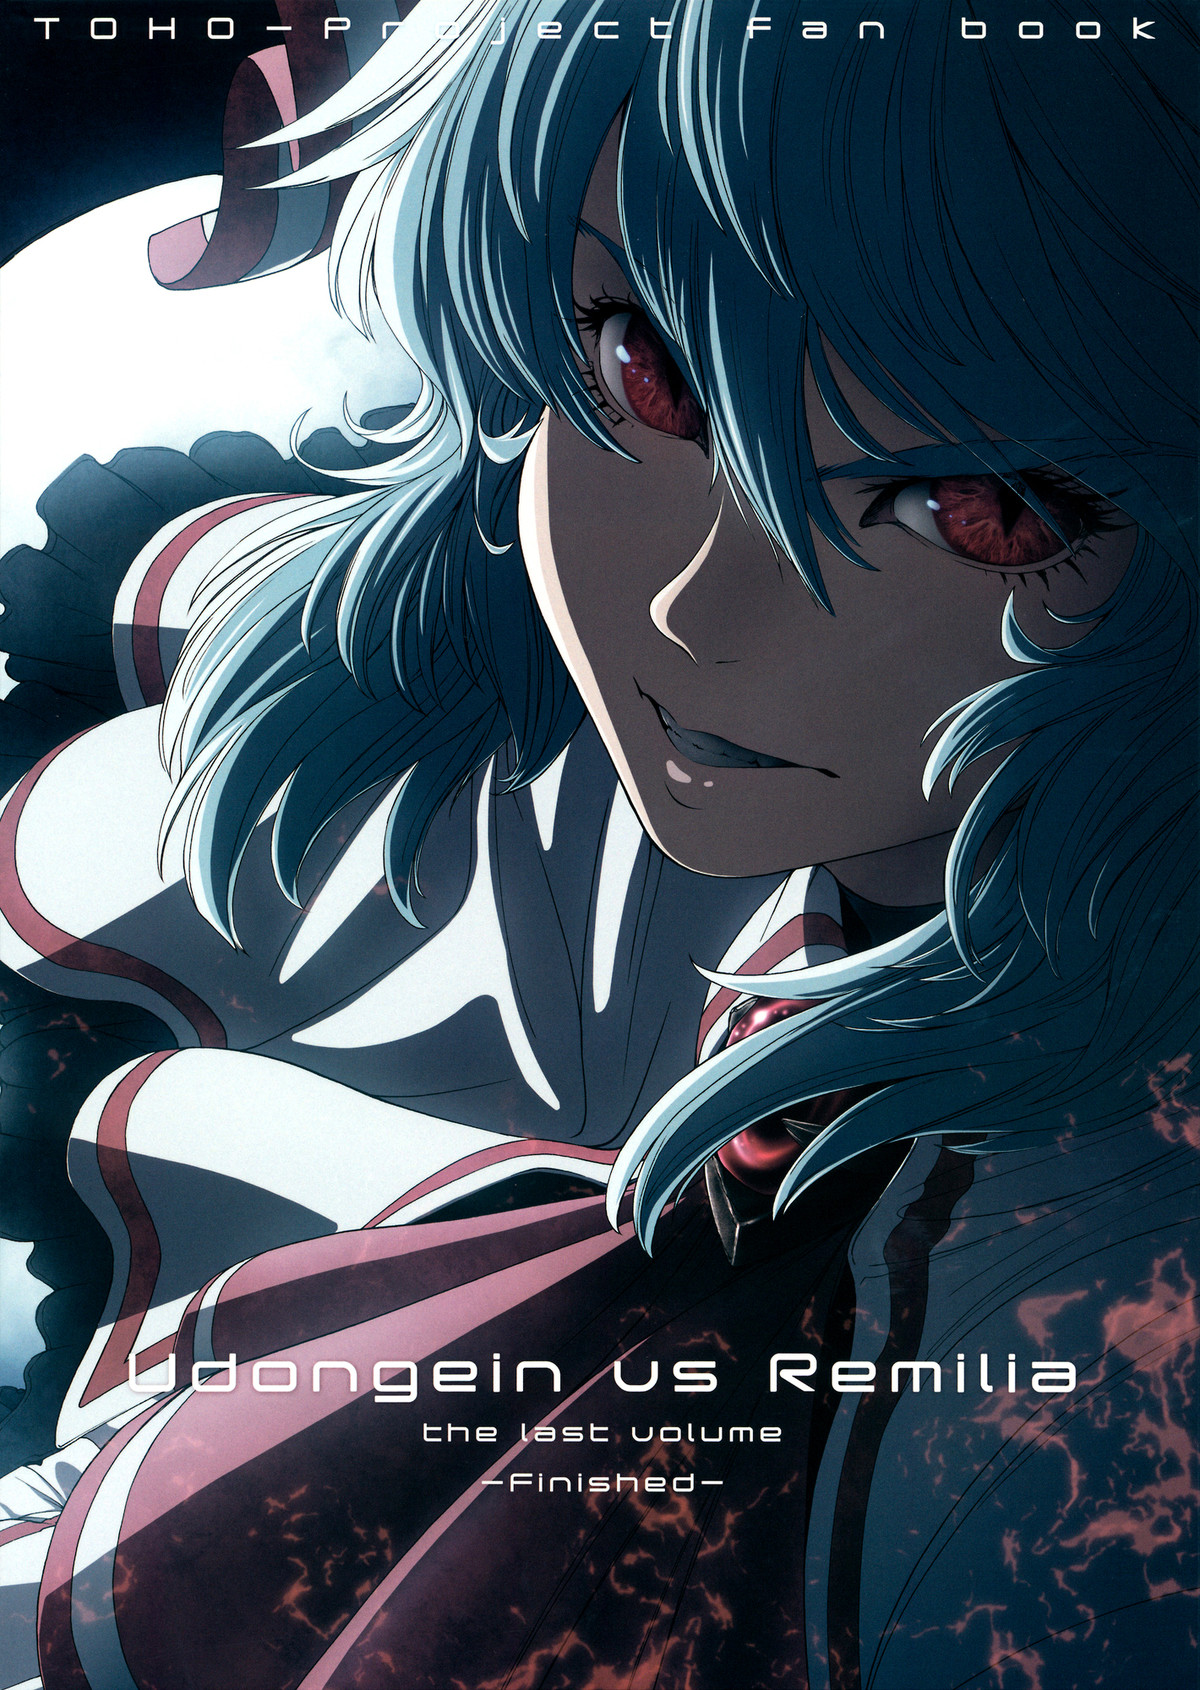 Udongein vs Remilia the last volume -Finished- by Imizu. Previous Chapter join list:. And here for future use